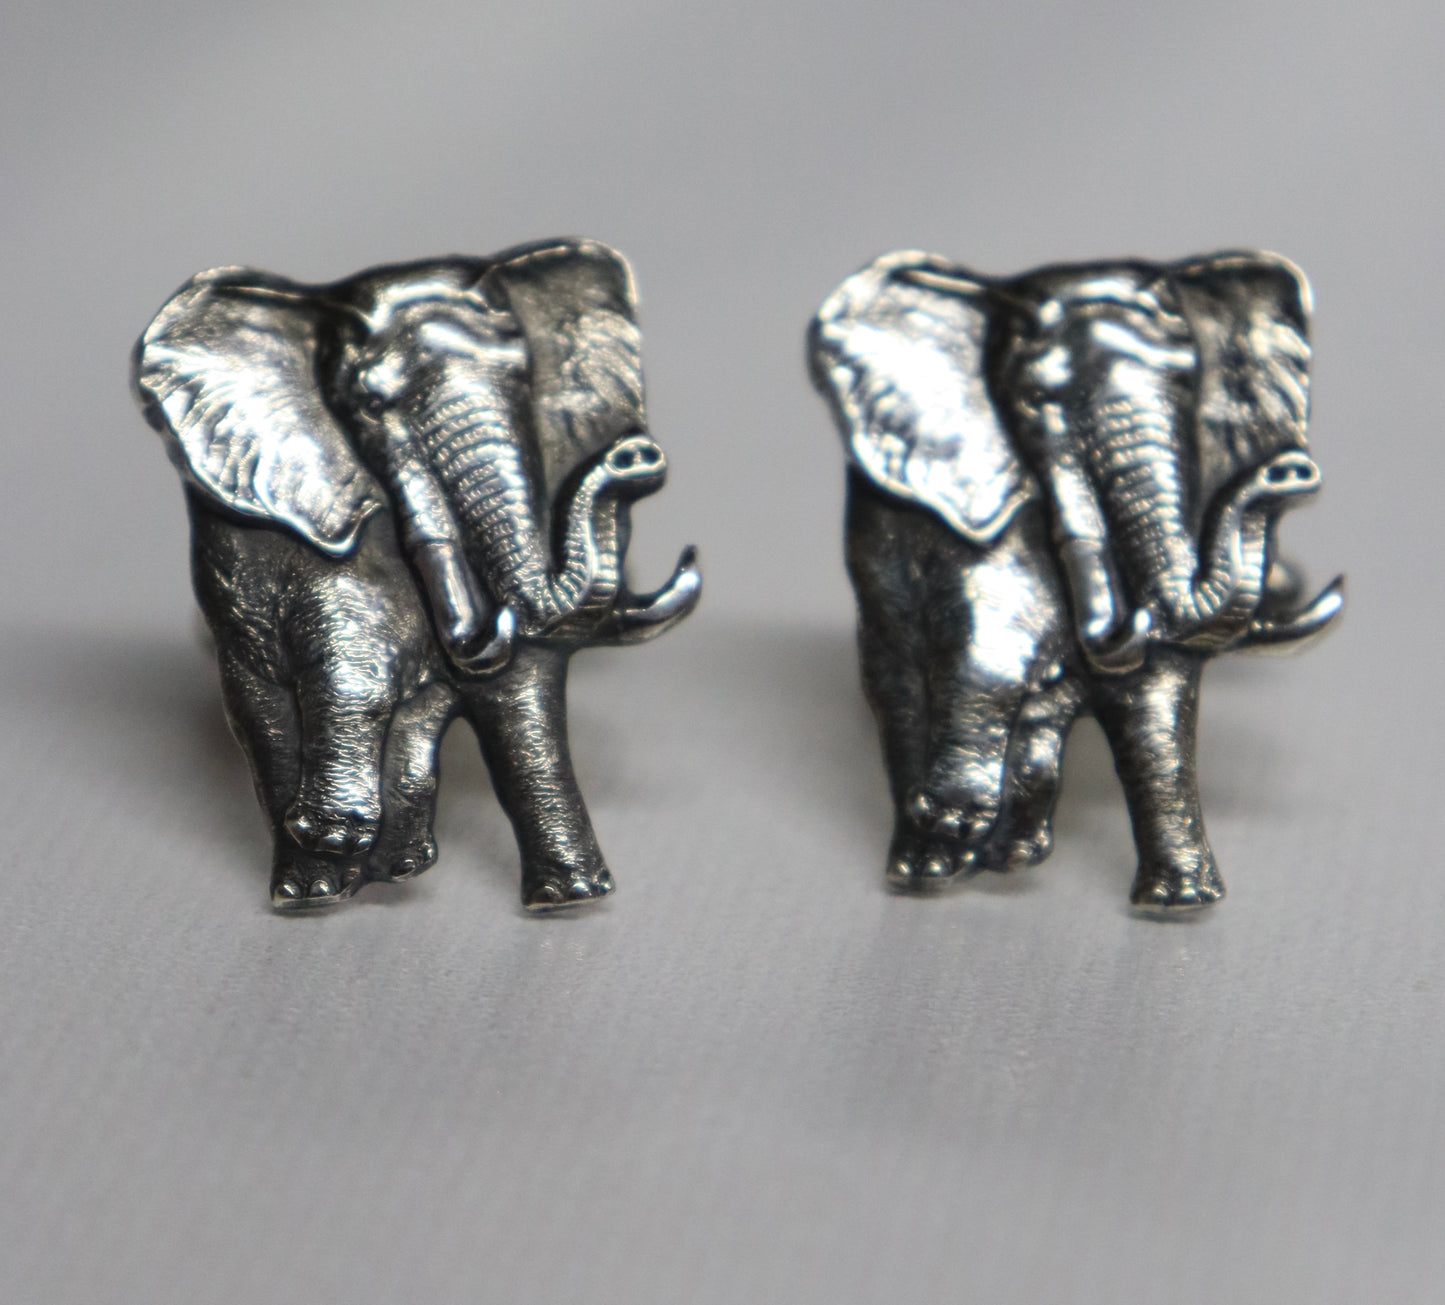 Clint Orms Cuff Links w/ Sterling Silver Elephant